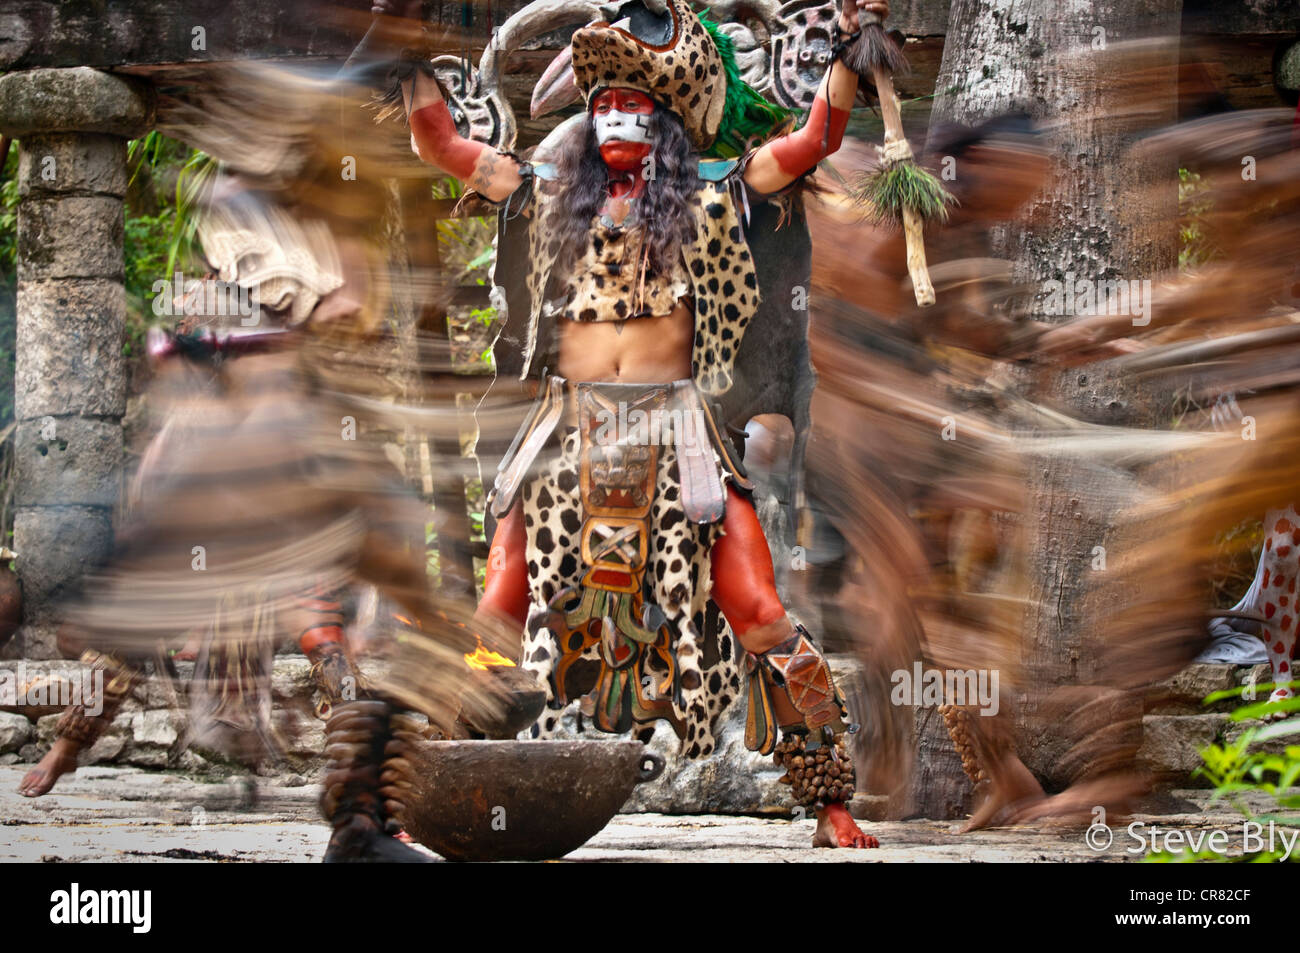 A Maya fokllore fire dance ritual is performed by mystical performers in Xcaret Show, Riviera Maya, , Quintana Roo, Mexico Stock Photo